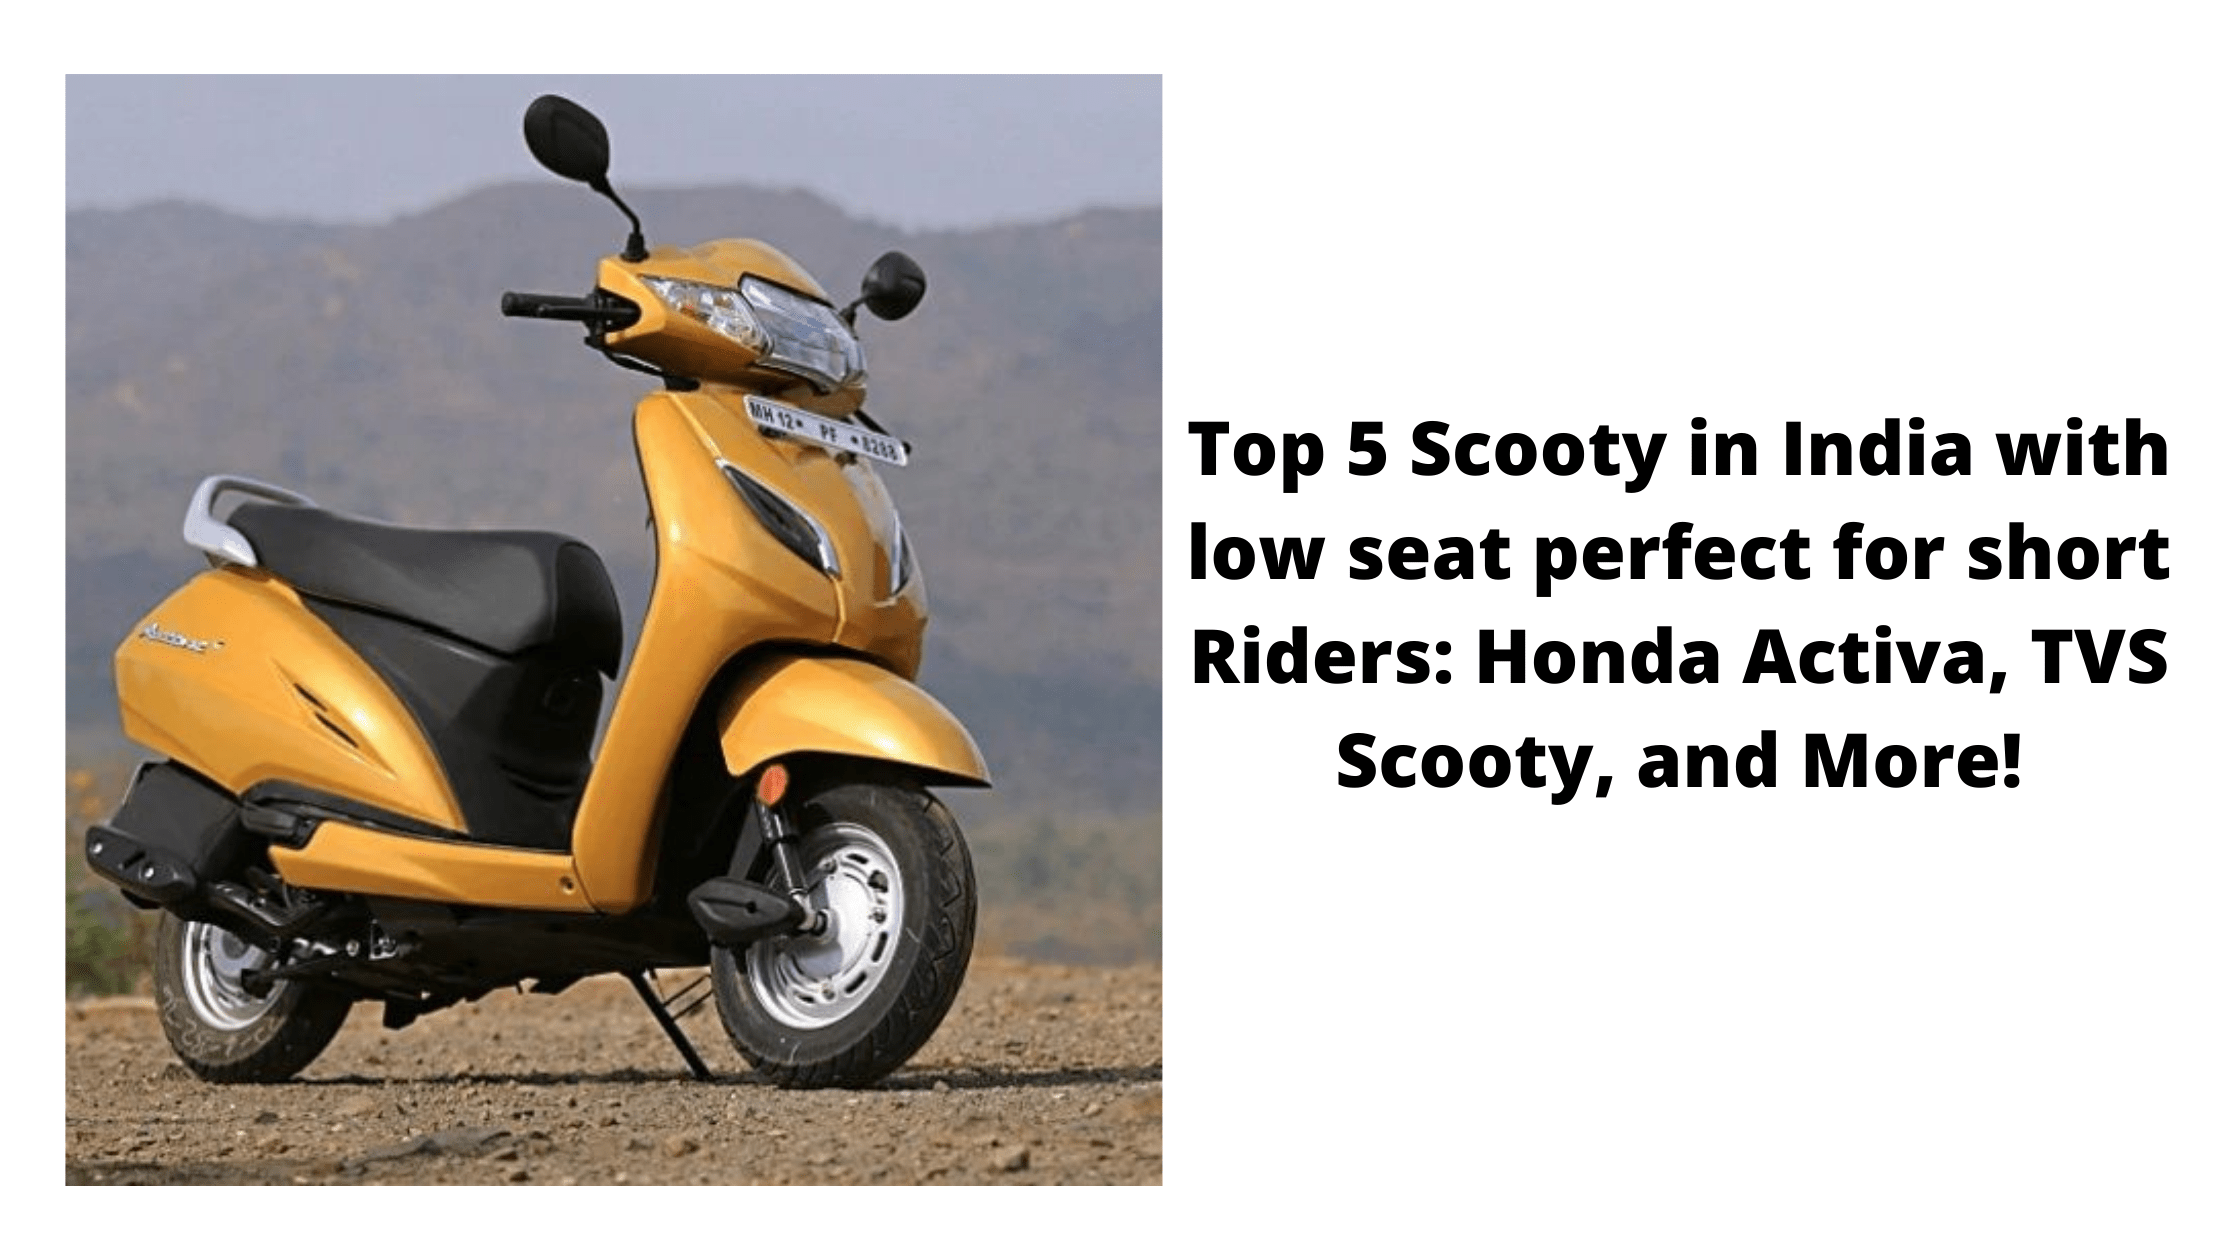 Top 5 Scooty in India with low seat perfect for short Riders: Honda Activa, TVS Scooty, and More!